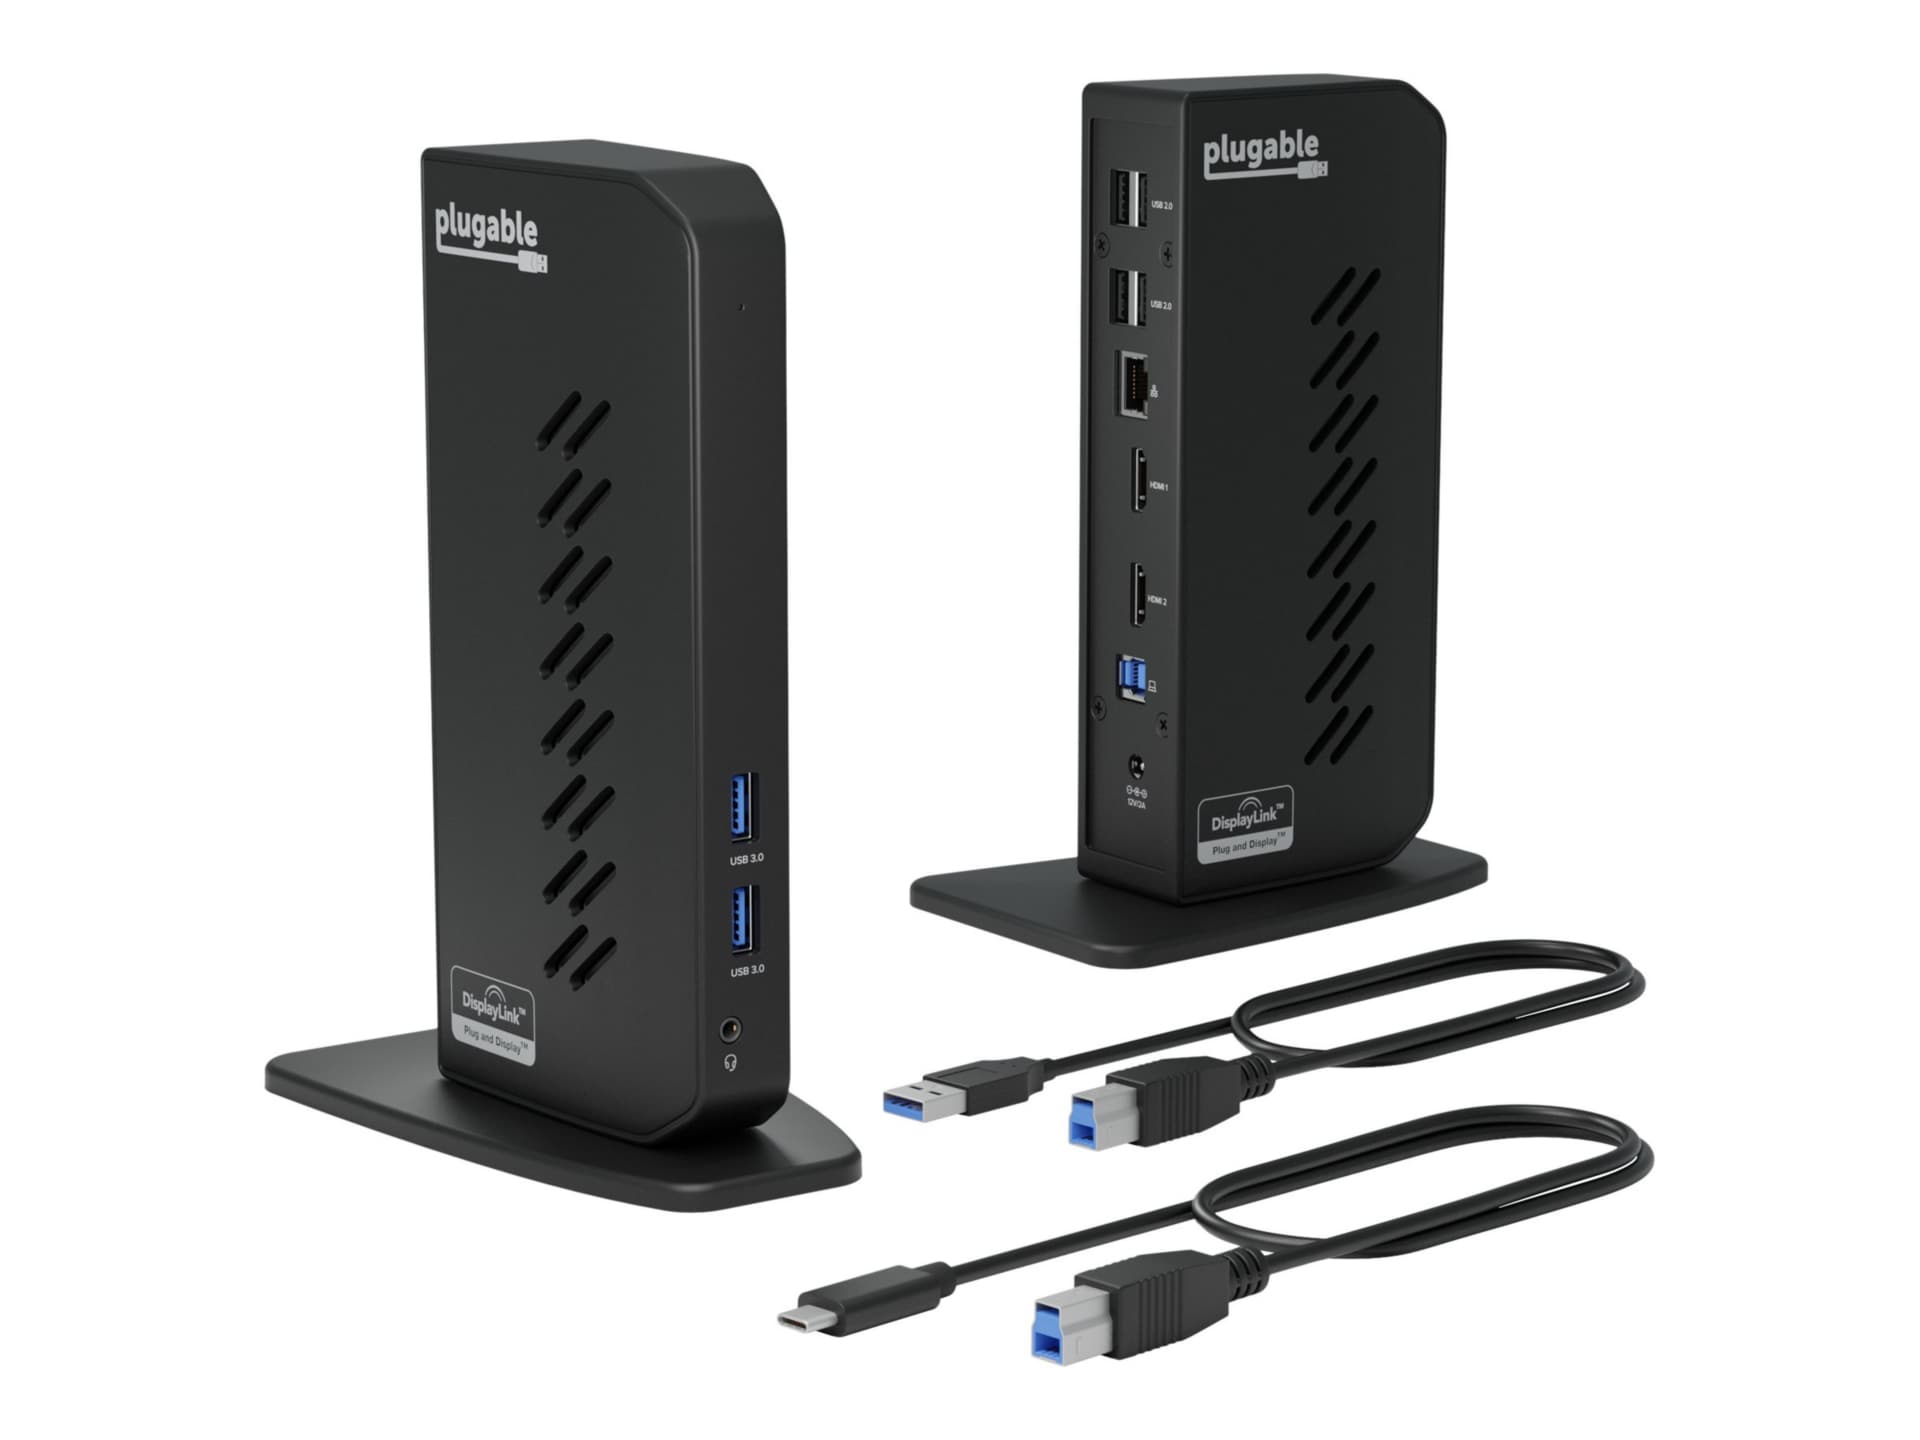 Rettidig Modtagelig for Flagermus Plugable USB 3.0 and USB-C Universal Laptop Docking Station-Windows and Mac  - UD-3900Z - Docking Stations & Port Replicators - CDW.com